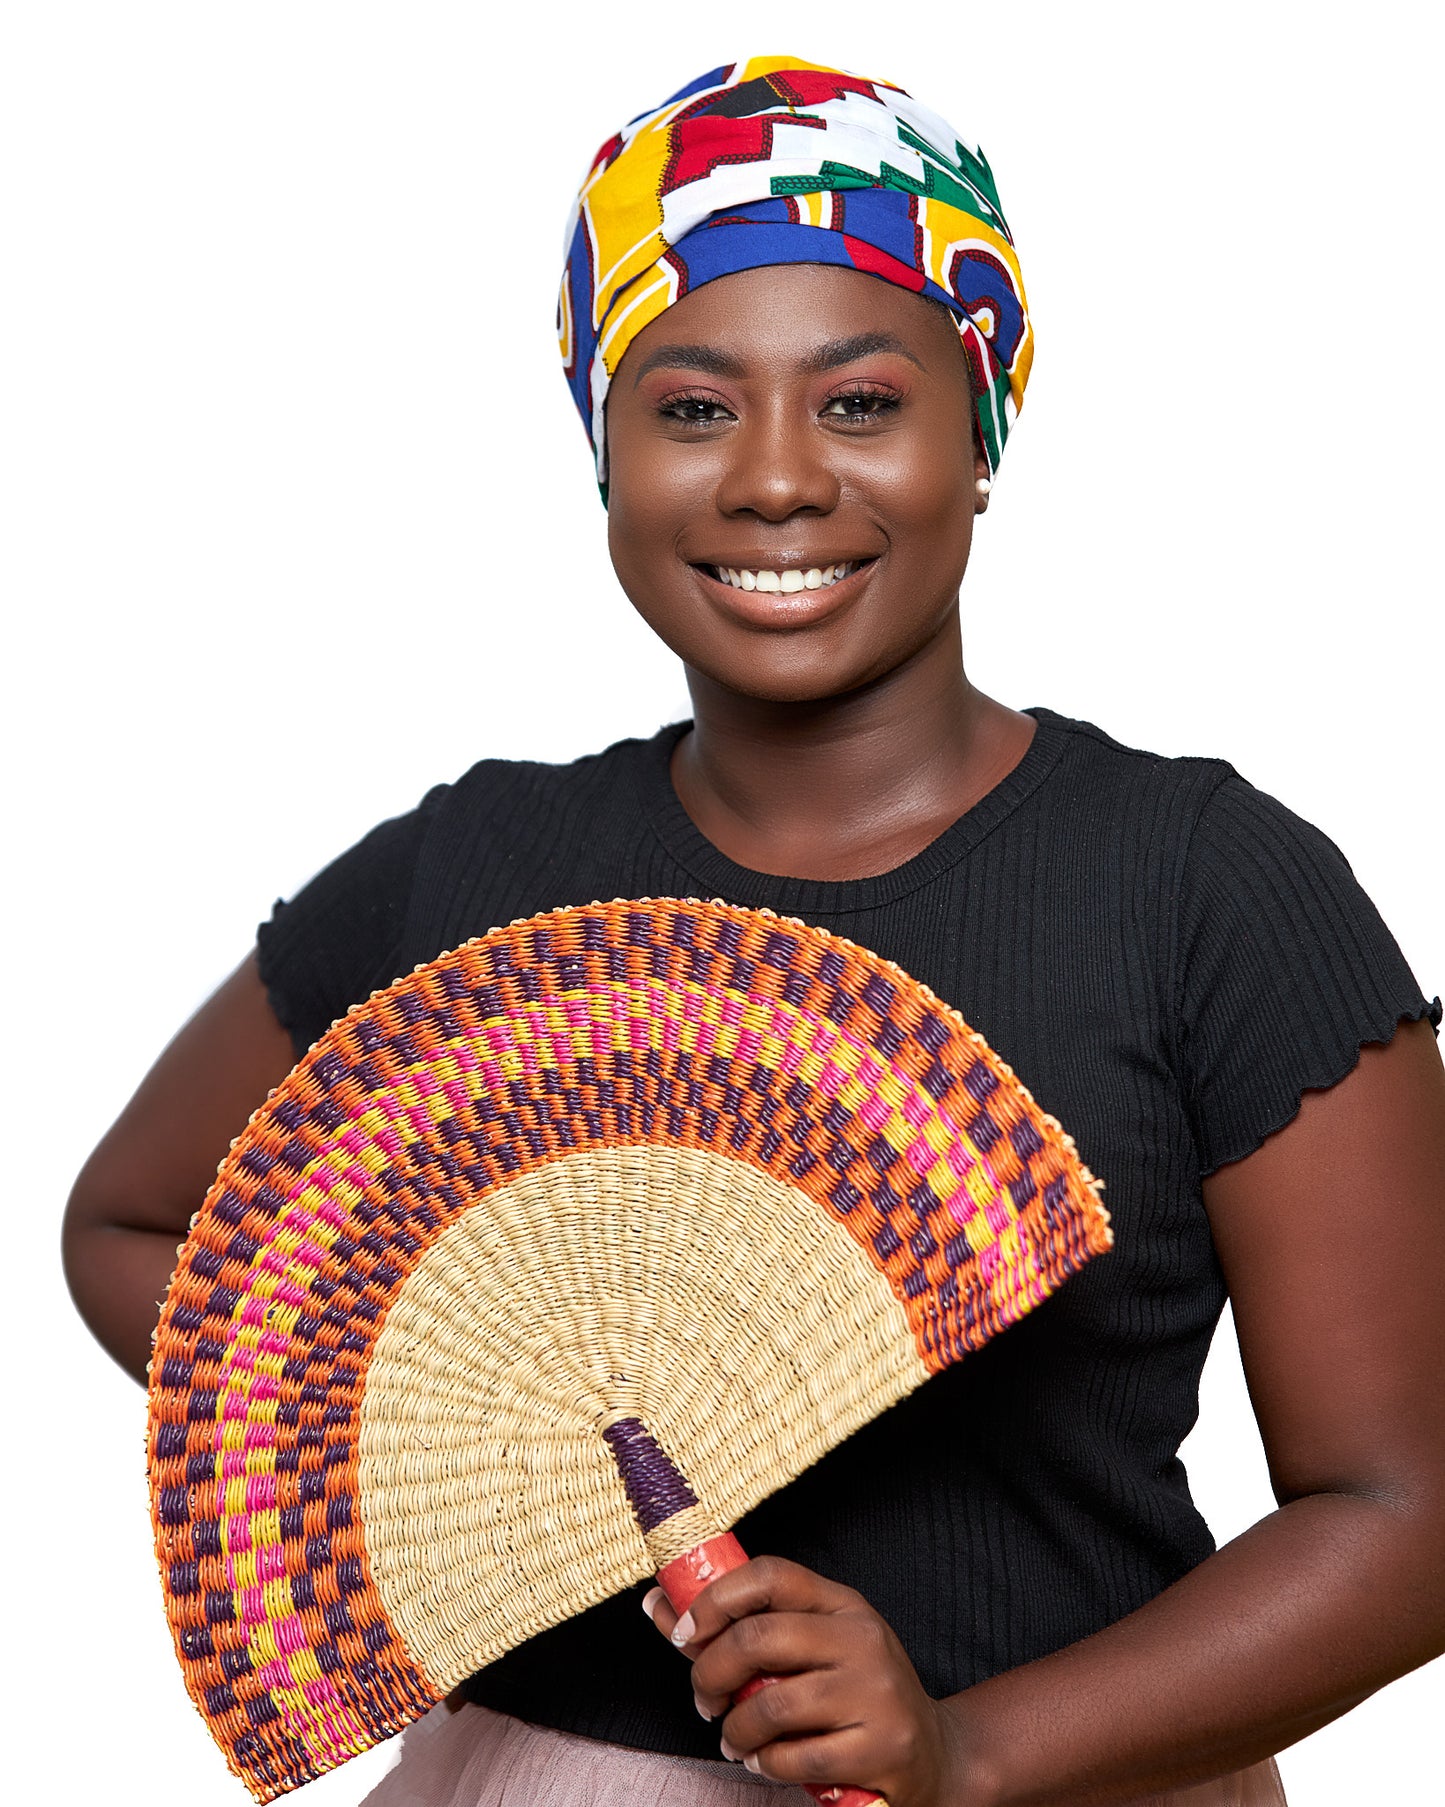 Ghanaian Kente Wax Print Made of Yellow, Red, Green,Blue, Black  and White Blended Beautiful Colours And Pattern With Adinkira Symbols, Hand Made Elastic Silklined Bonnet With Band